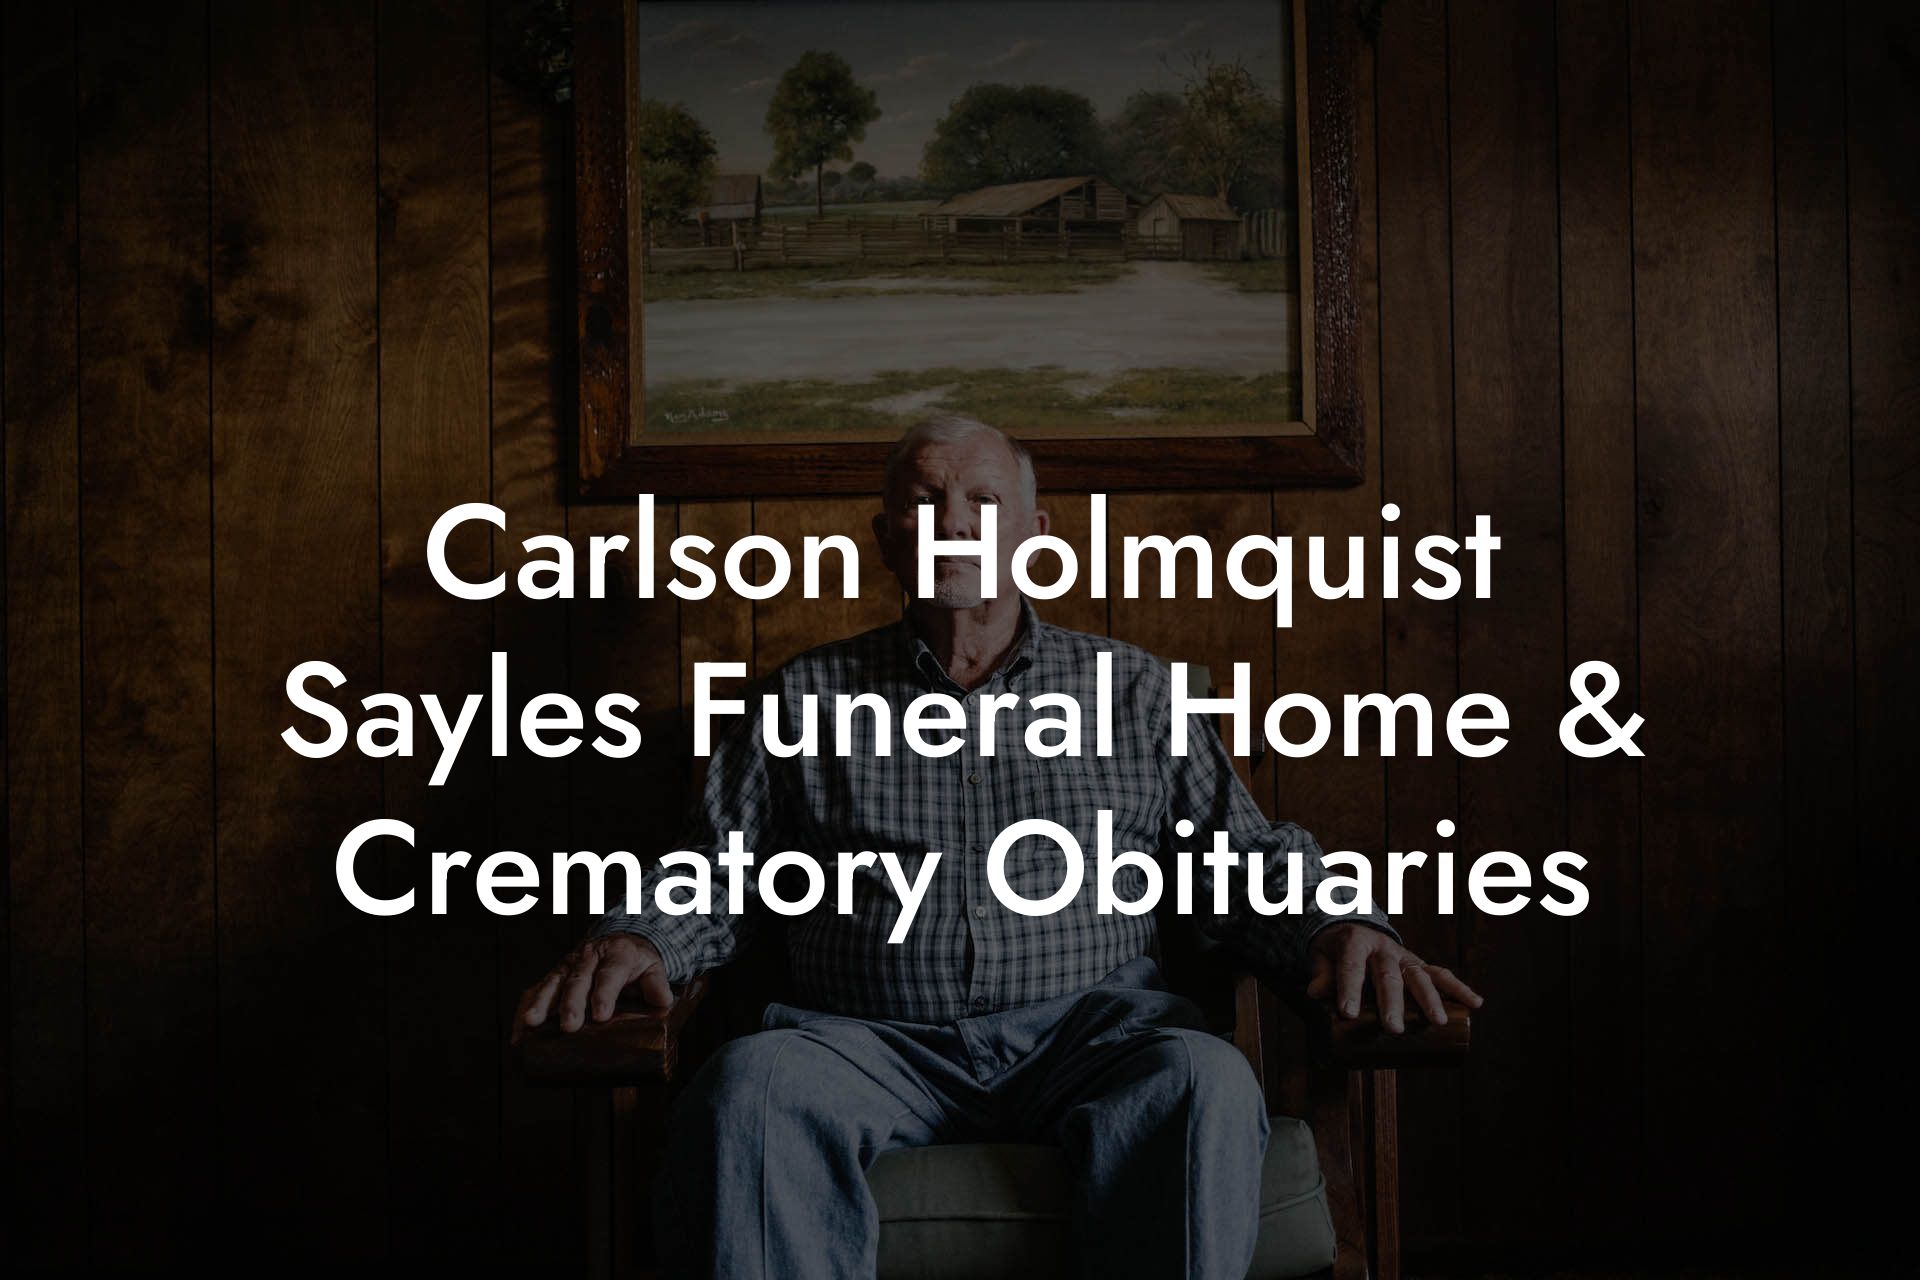 Carlson Holmquist Sayles Funeral Home & Crematory Obituaries